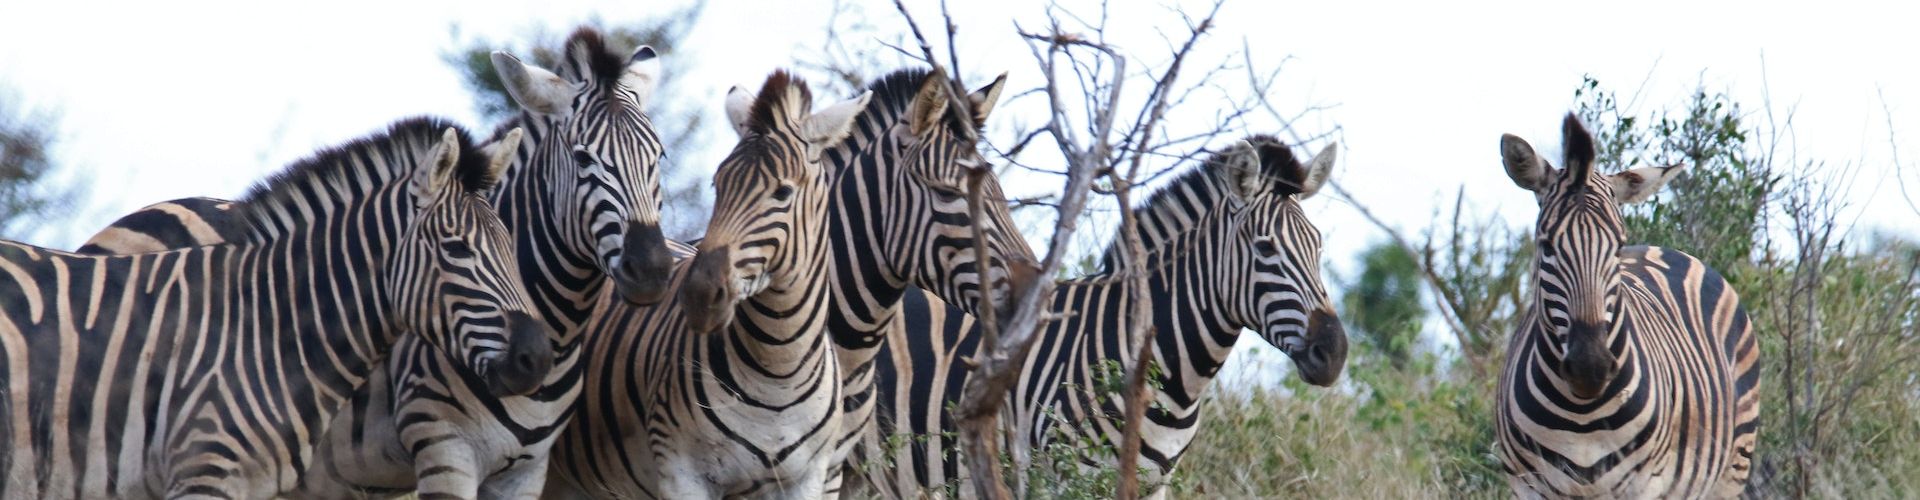 A group of zebras standing next to each other in Lake Manyara National Park